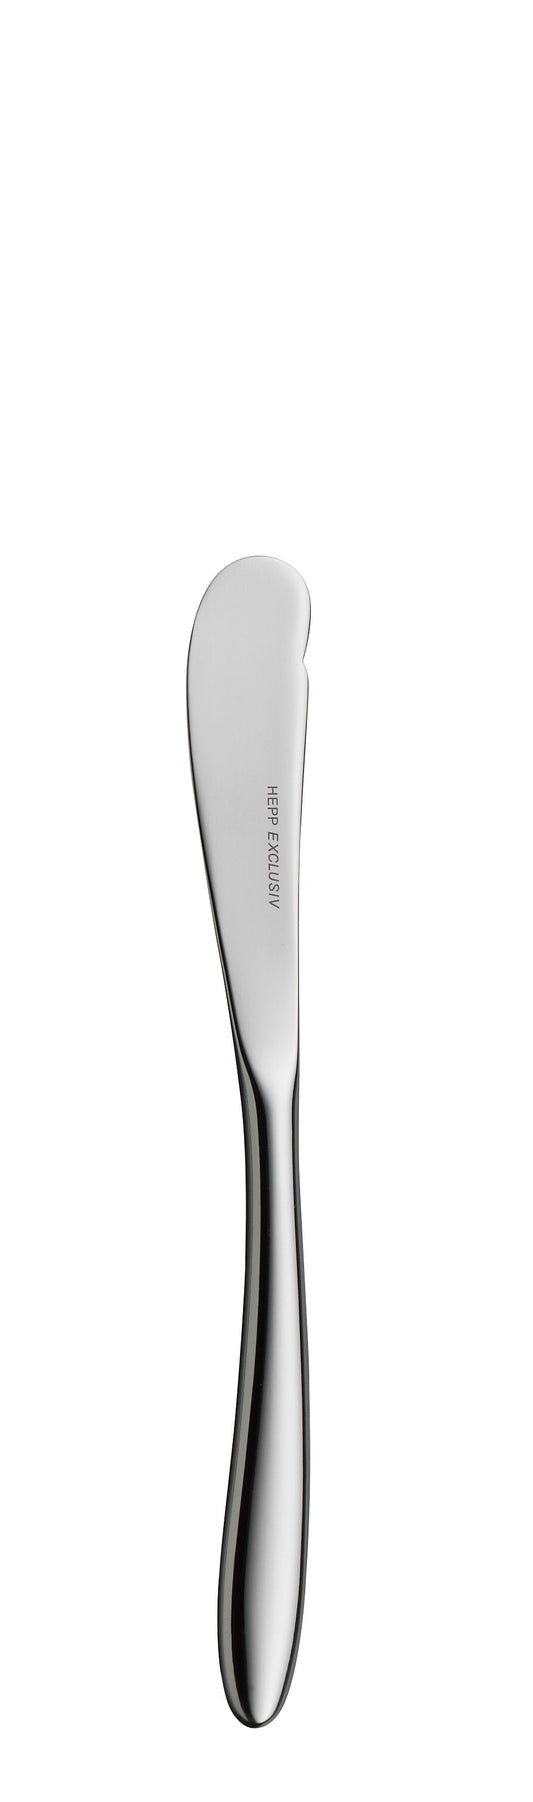 Butter knife MB AVES silver plated 170mm